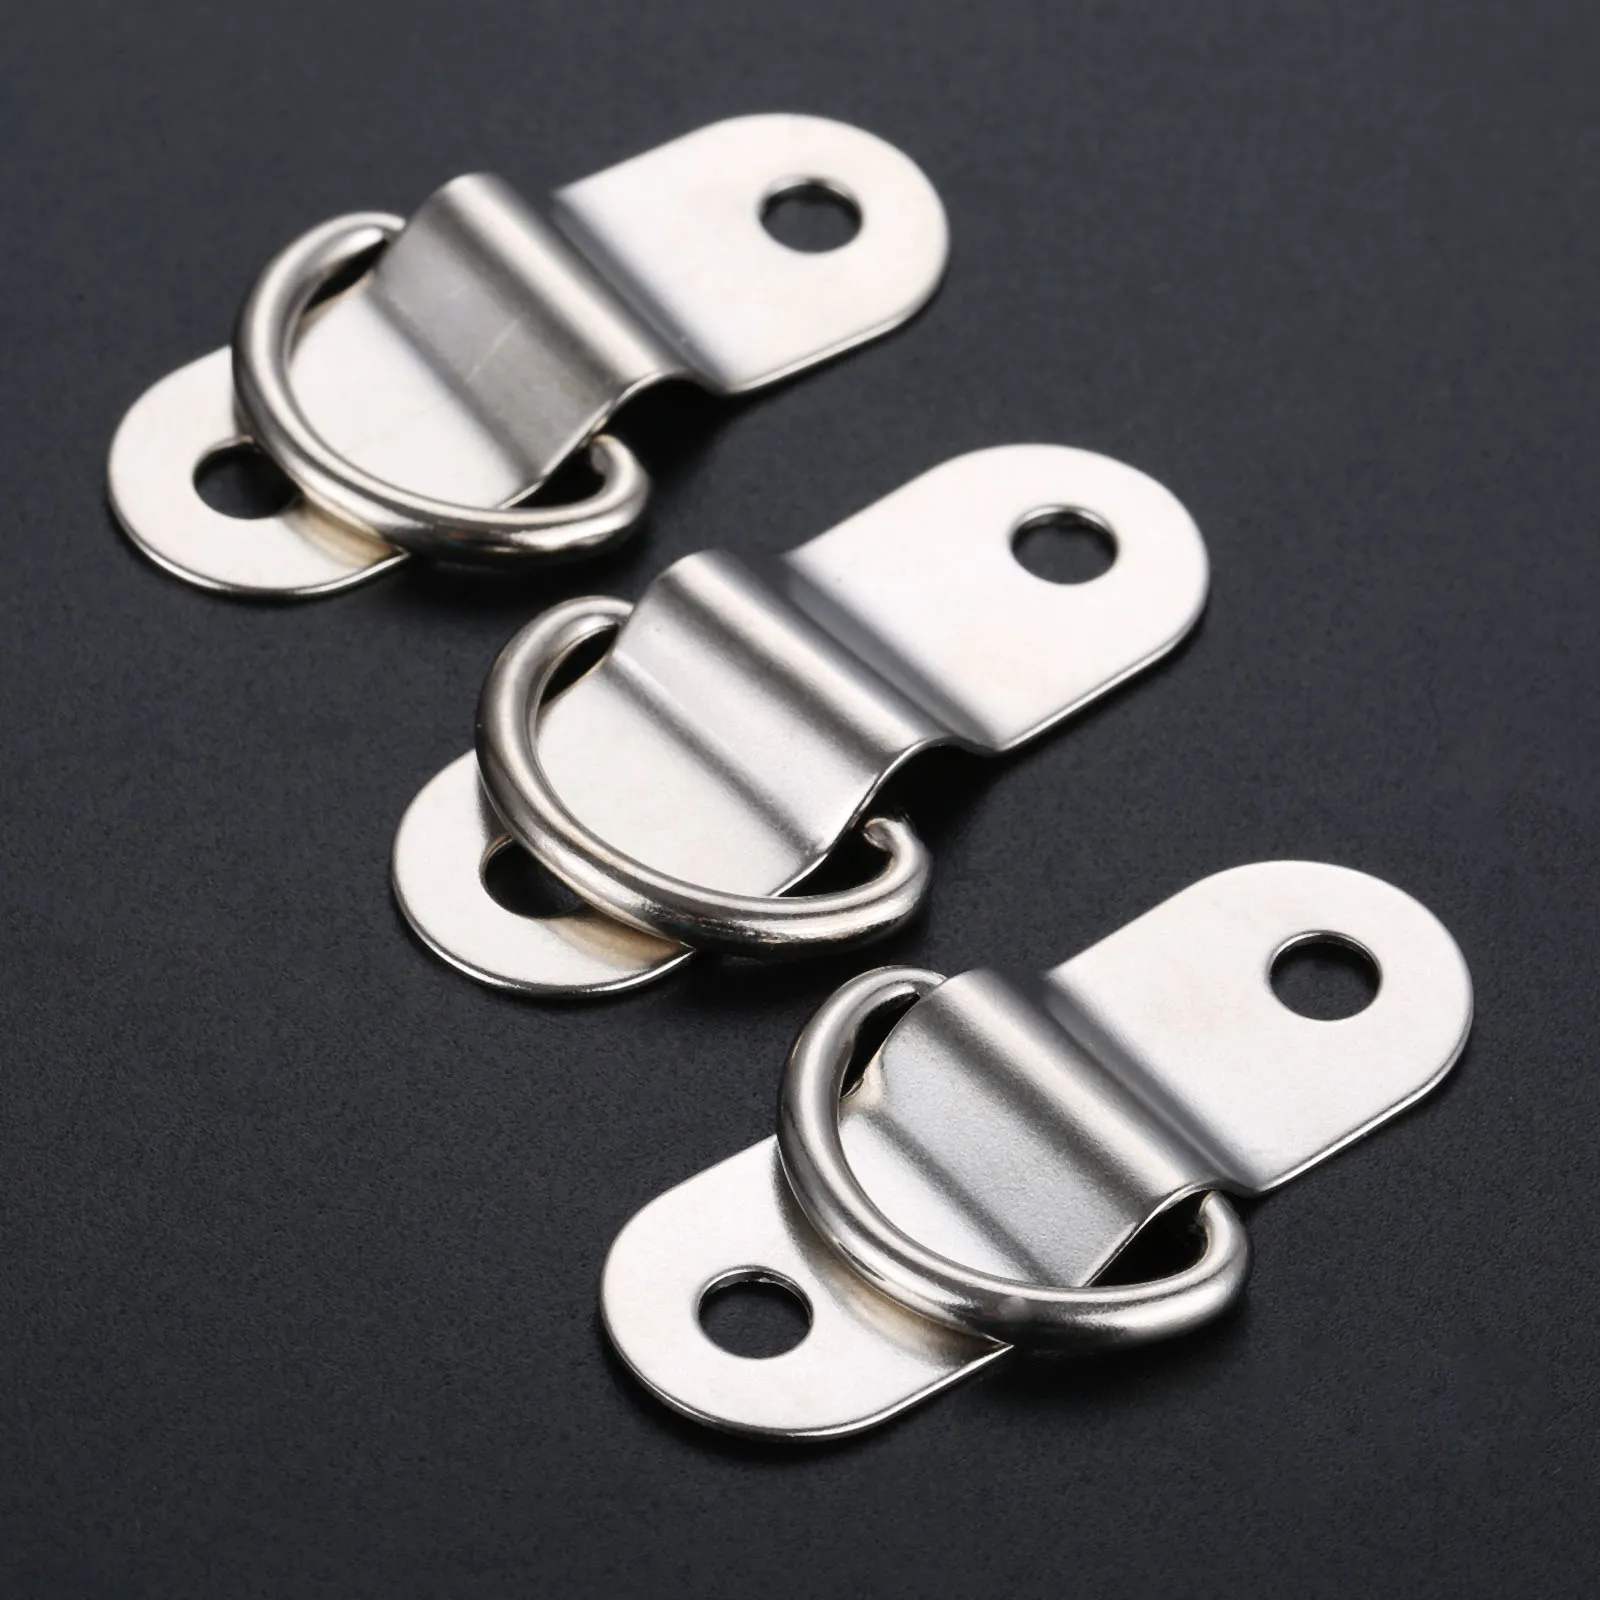 10Pcs Metal Flat Seamless D Ring Button Half Round Buckle Garment Accessories Bags Hats Handle DIY Hardware Fitting 46*16mm